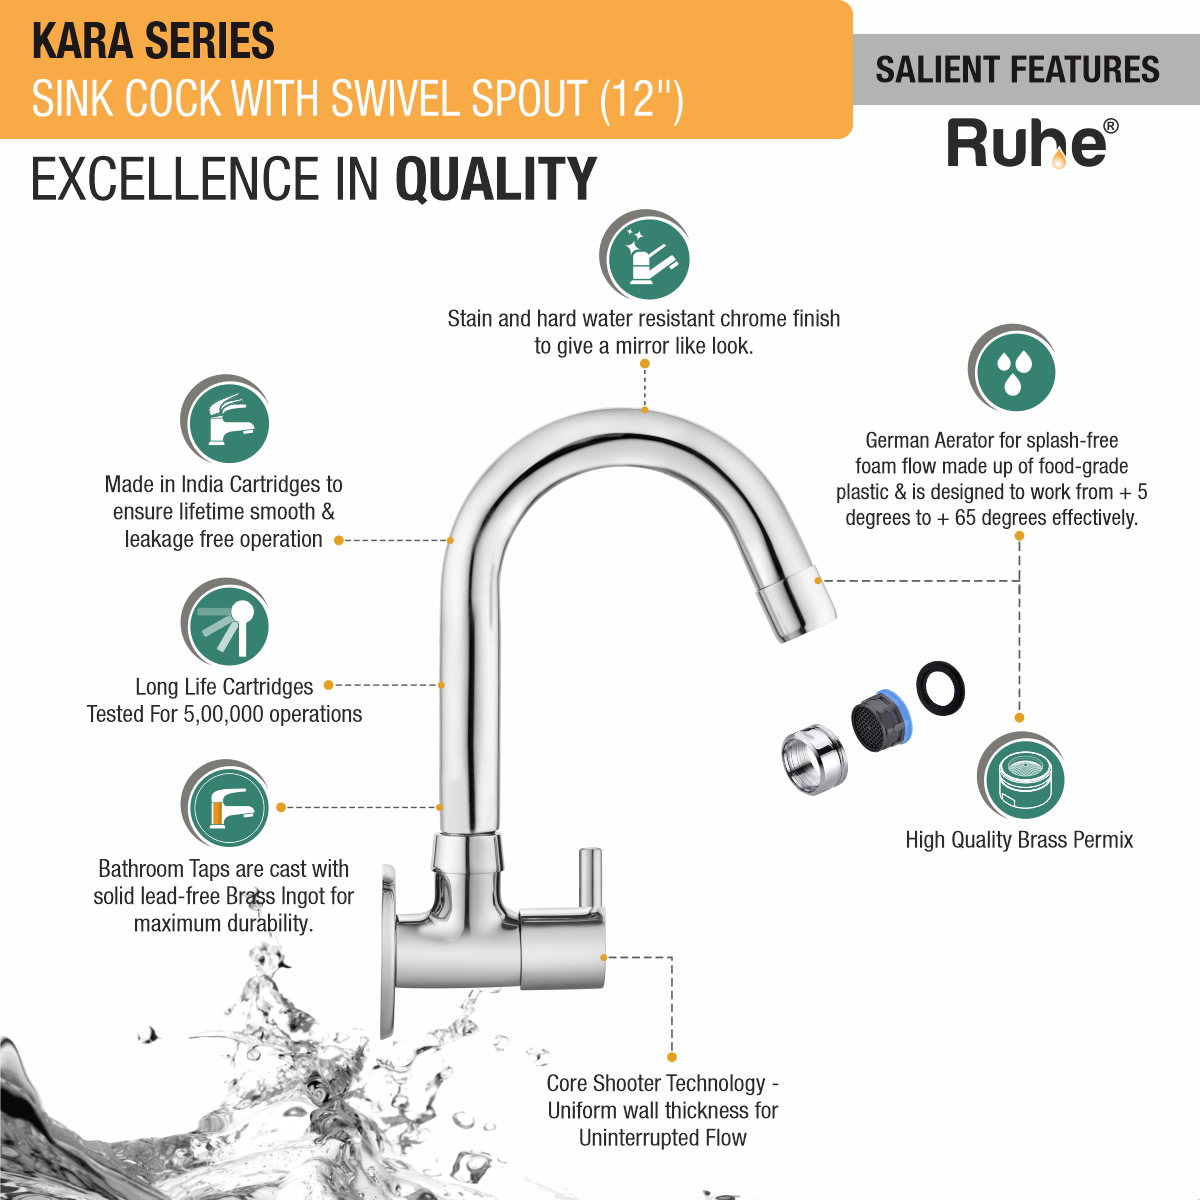 Kara Sink Tap with Small (12 inches) Round Swivel Spout Brass Faucet features and benefits